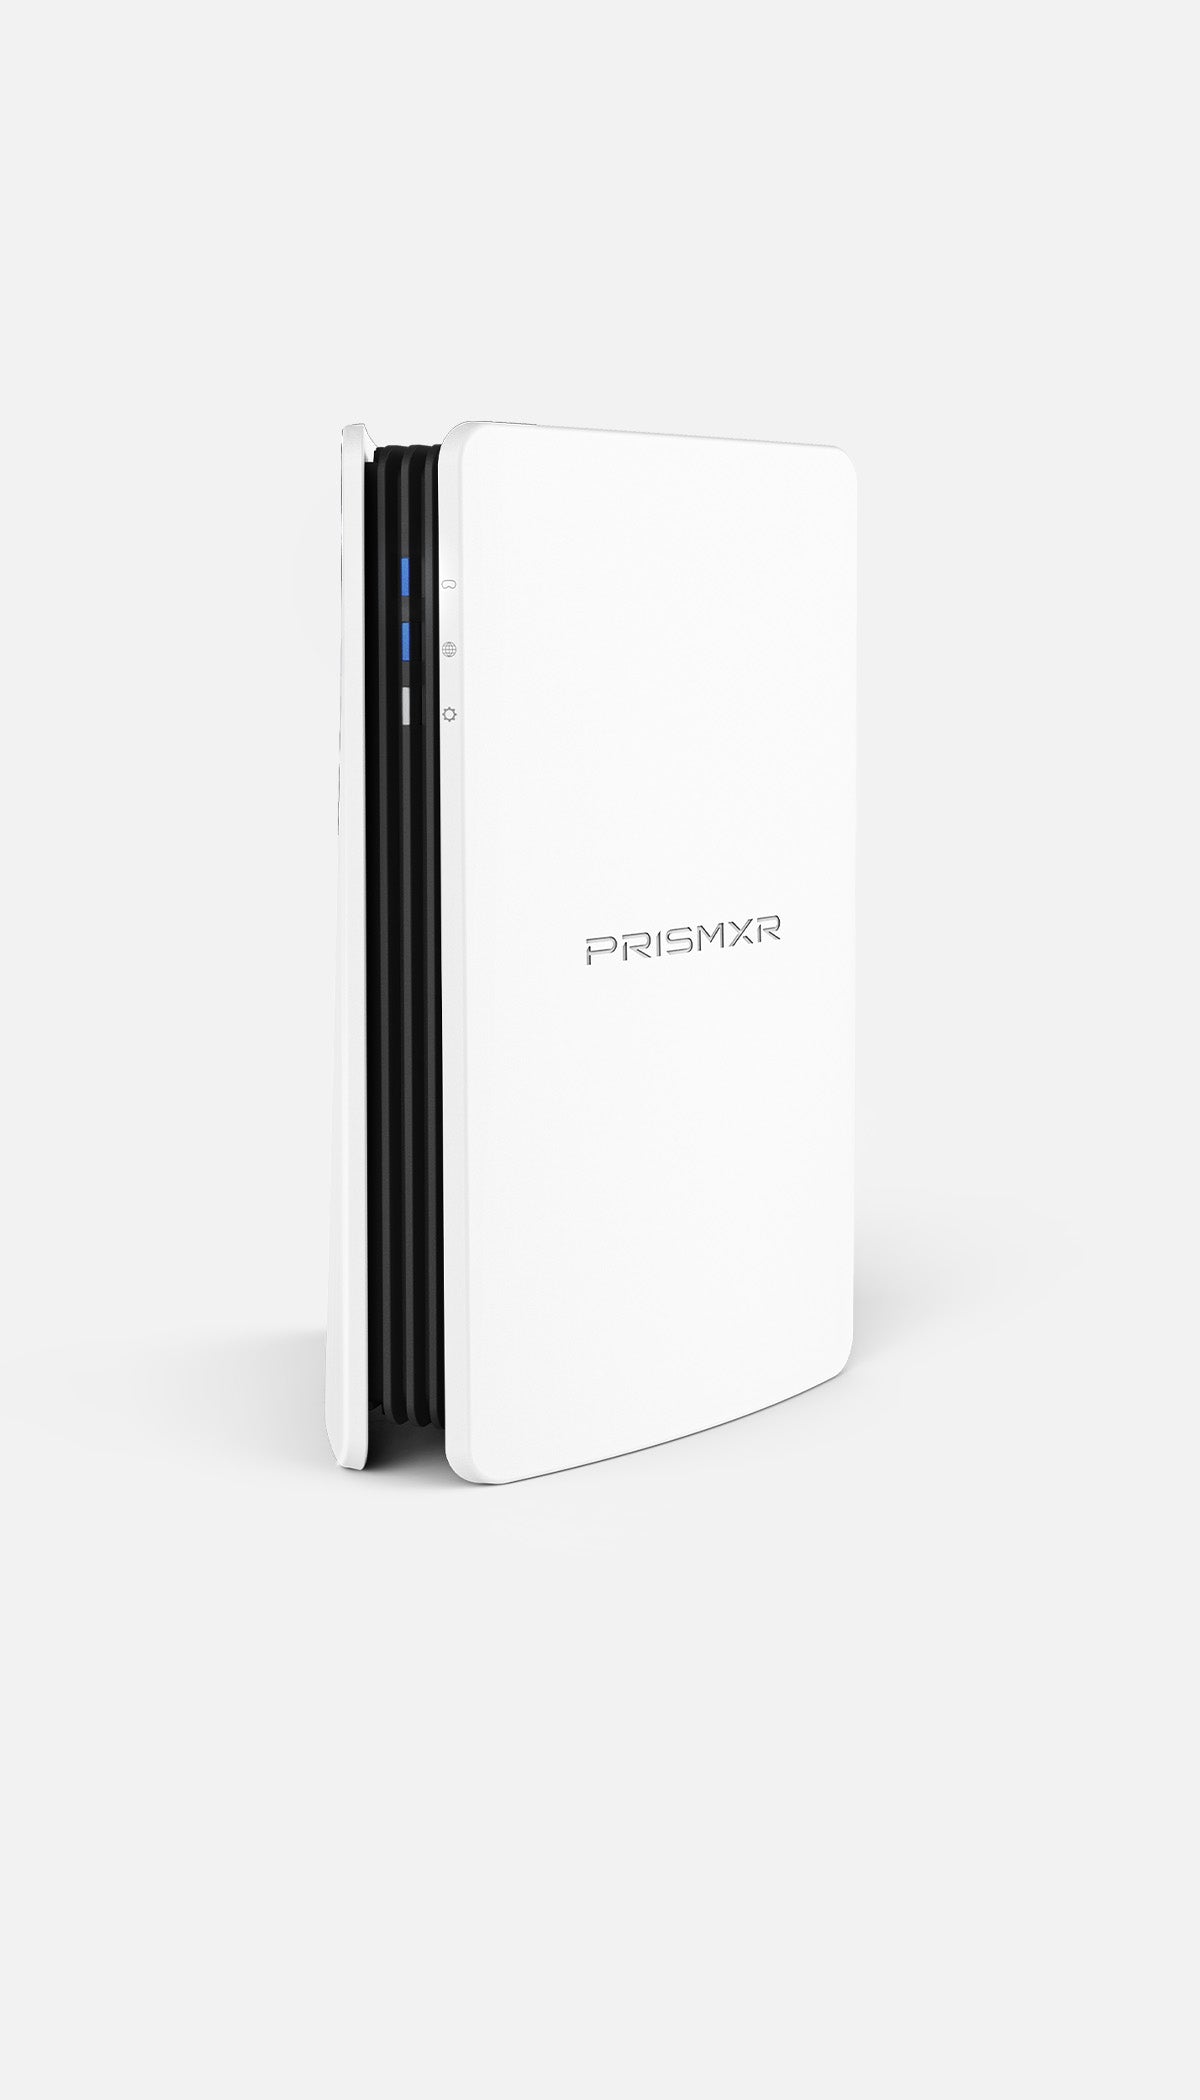 P Puppis S1 Specialized Router - for PC-VR Streaming